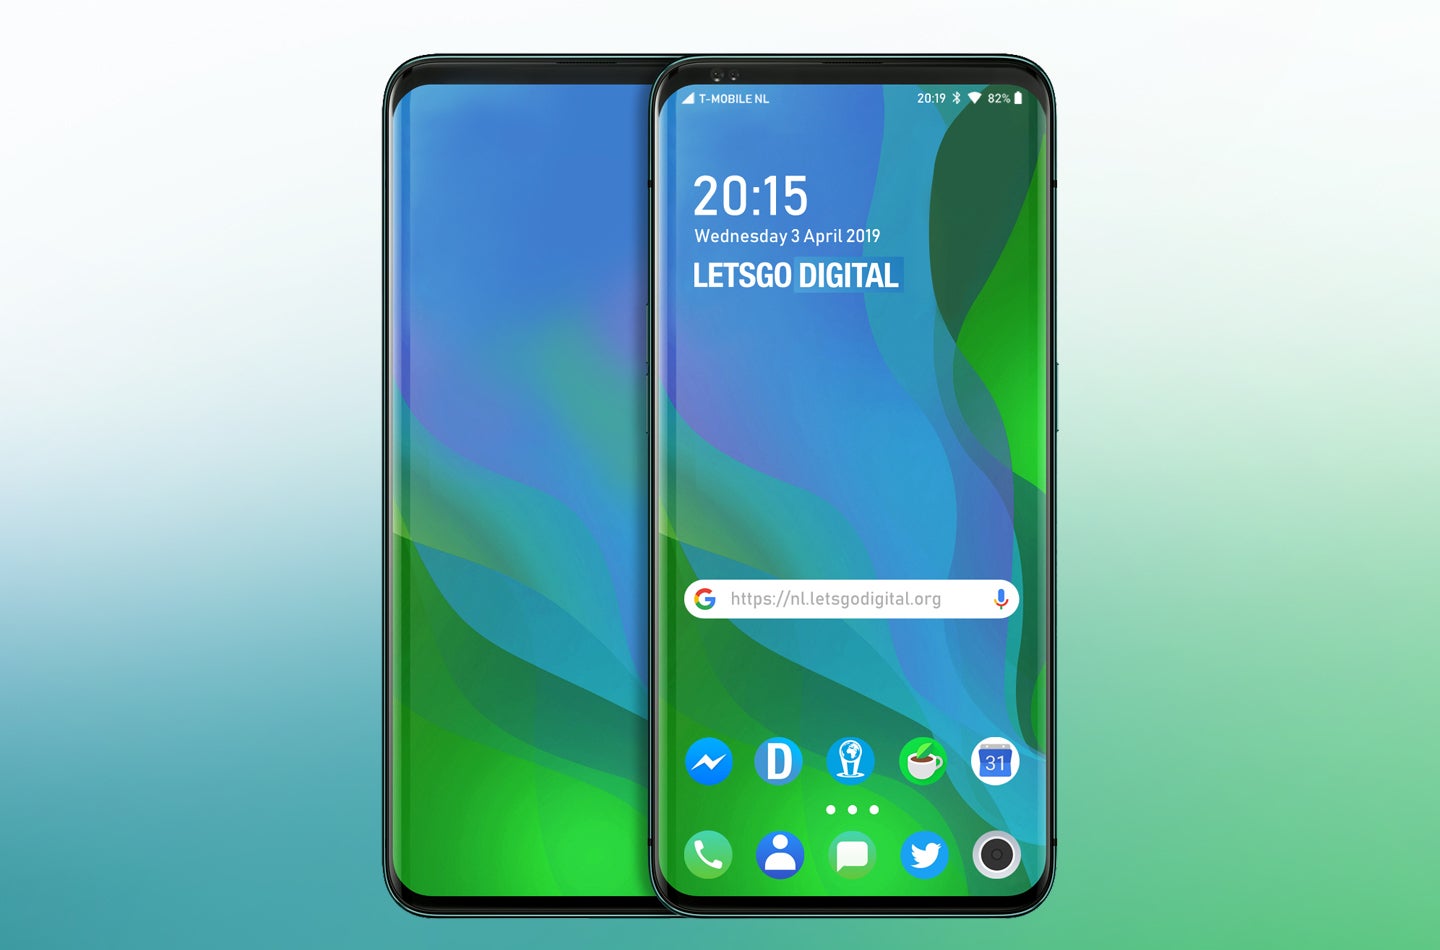 Oppo's designs are getting crazier, new patent shows pop-up display and side-sliding screen